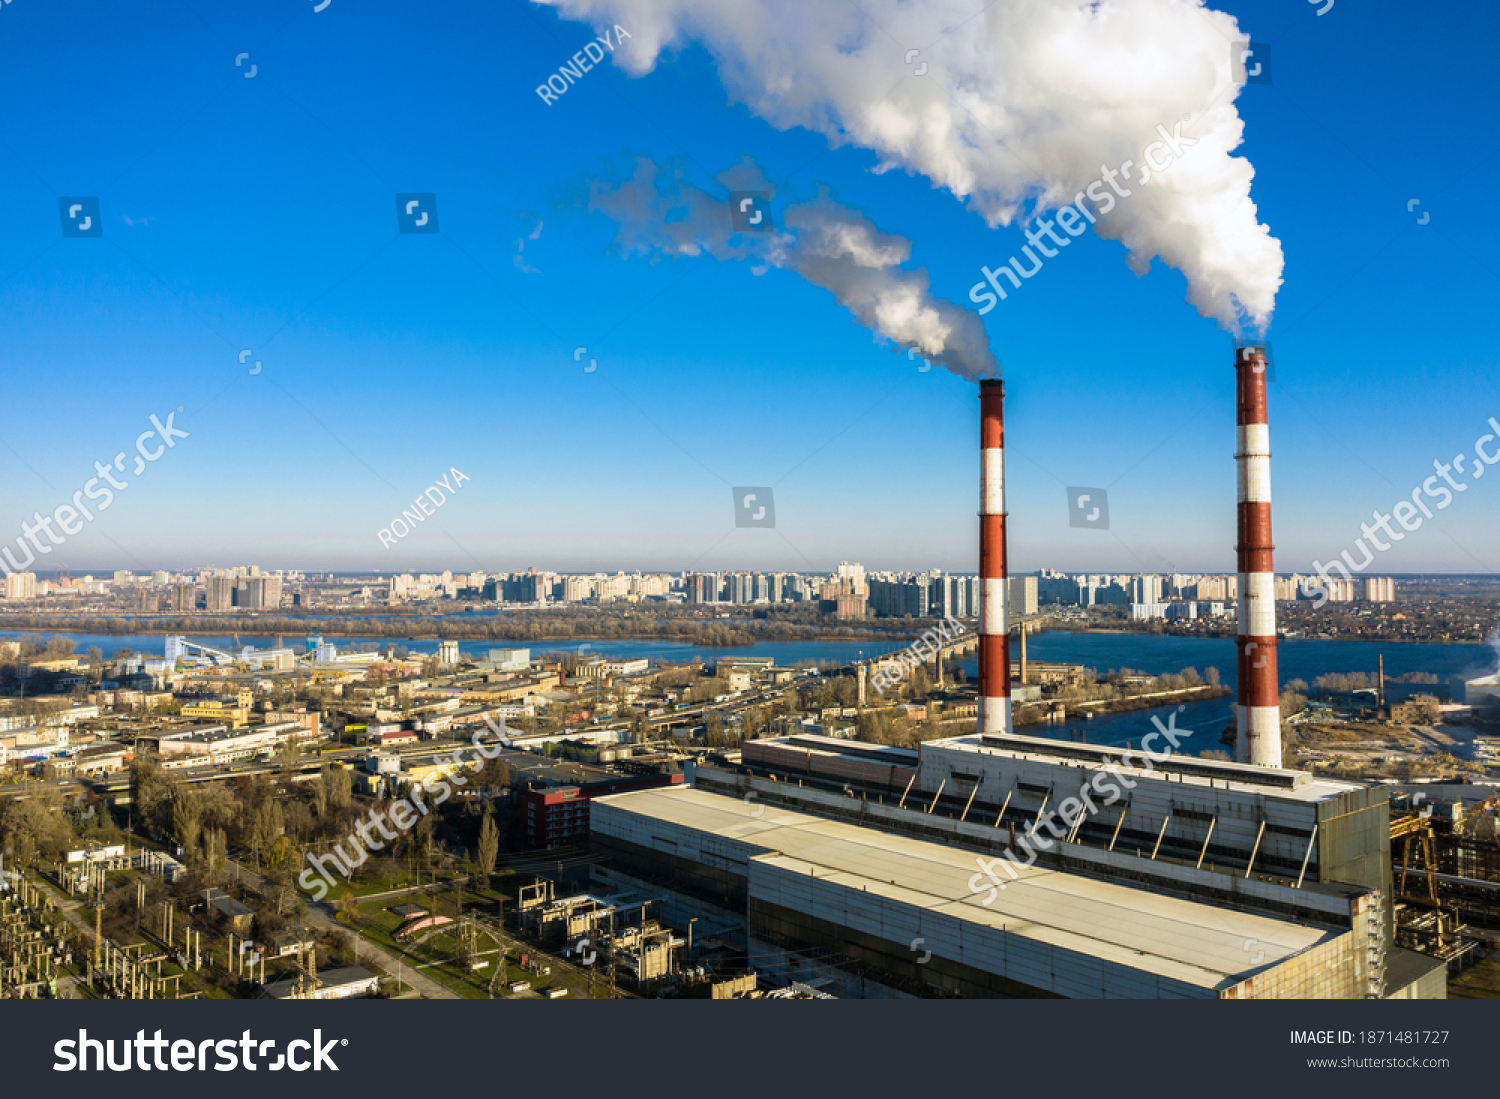 Garbage incineration plant. Waste incinerator plant with smoking smokestack. The problem of environmental pollution by factories aerial view #1871481727